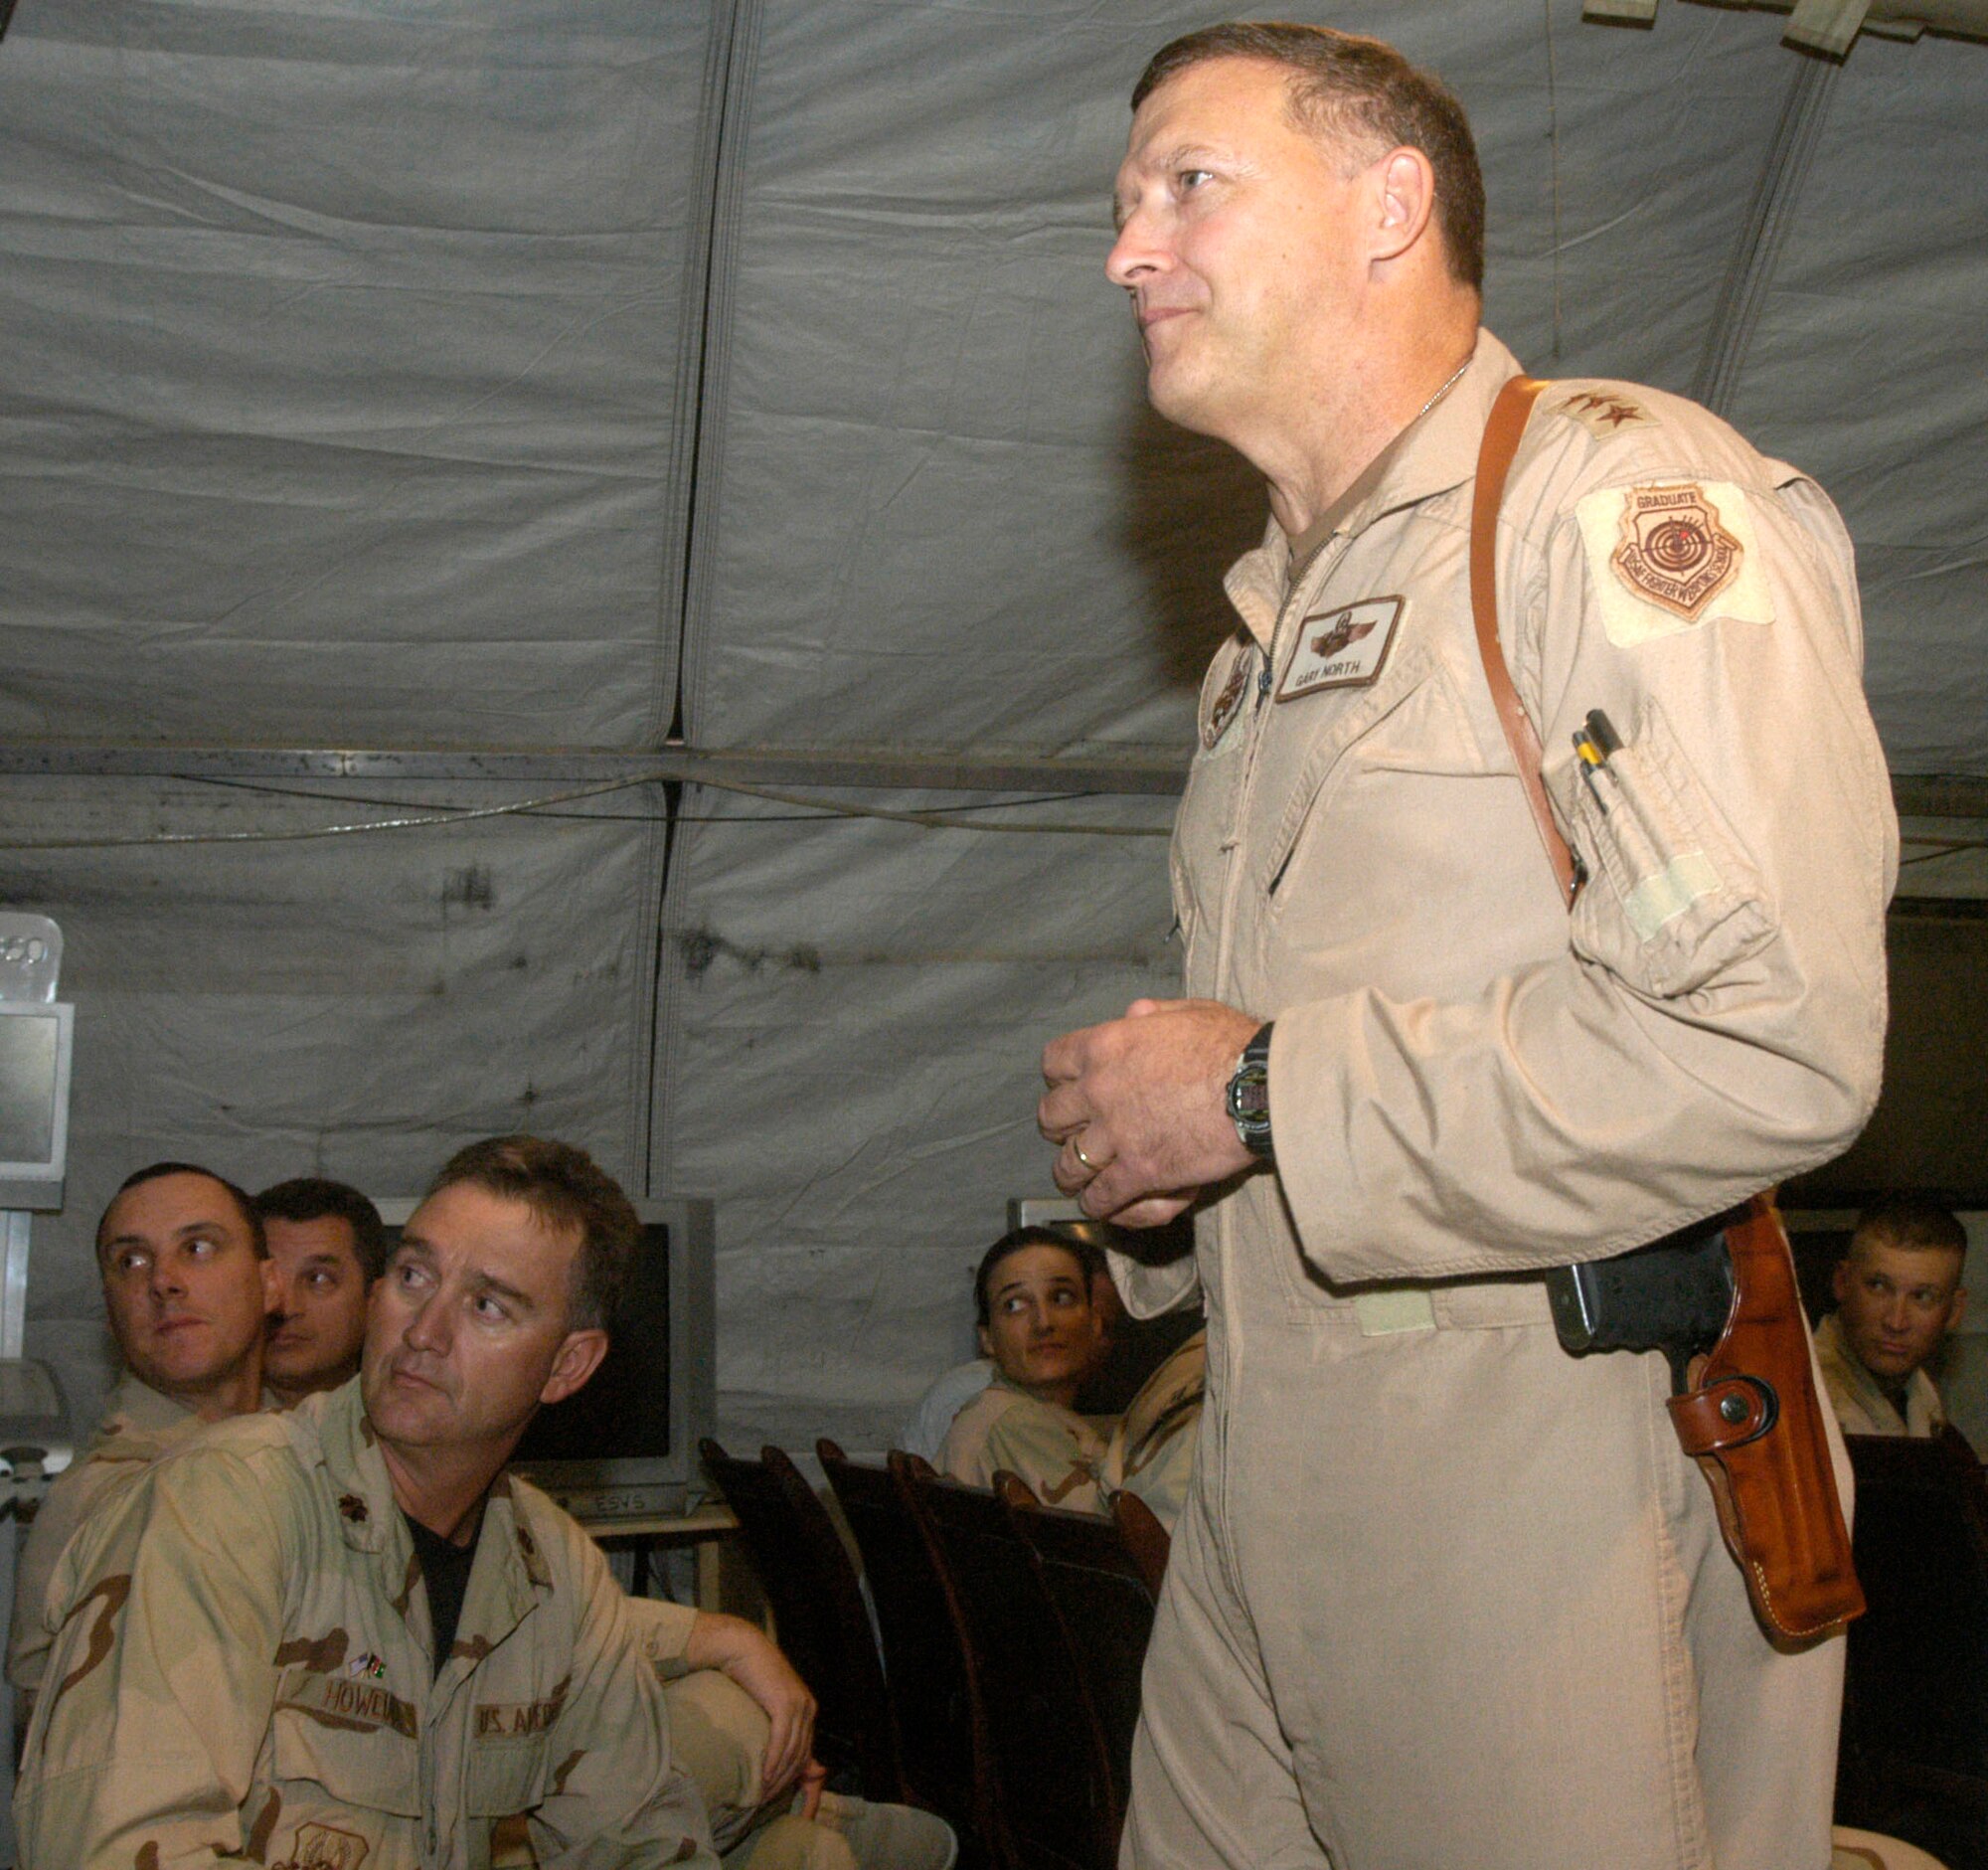 Lt. Gen. Gary North, commander of Central Command Air Forces, listens to a question from an Airman deployed to Bagram Airfield, Afghanistan, during an Airman's call at the base Sept. 7.  General North told Airmen at Bagram that the base is vital to the war against terrorism and that 120-day air expeditionary force rotations will remain the standard for most career fields in the Air Force.  (U.S. Air Force photo/Maj. David Kurle)